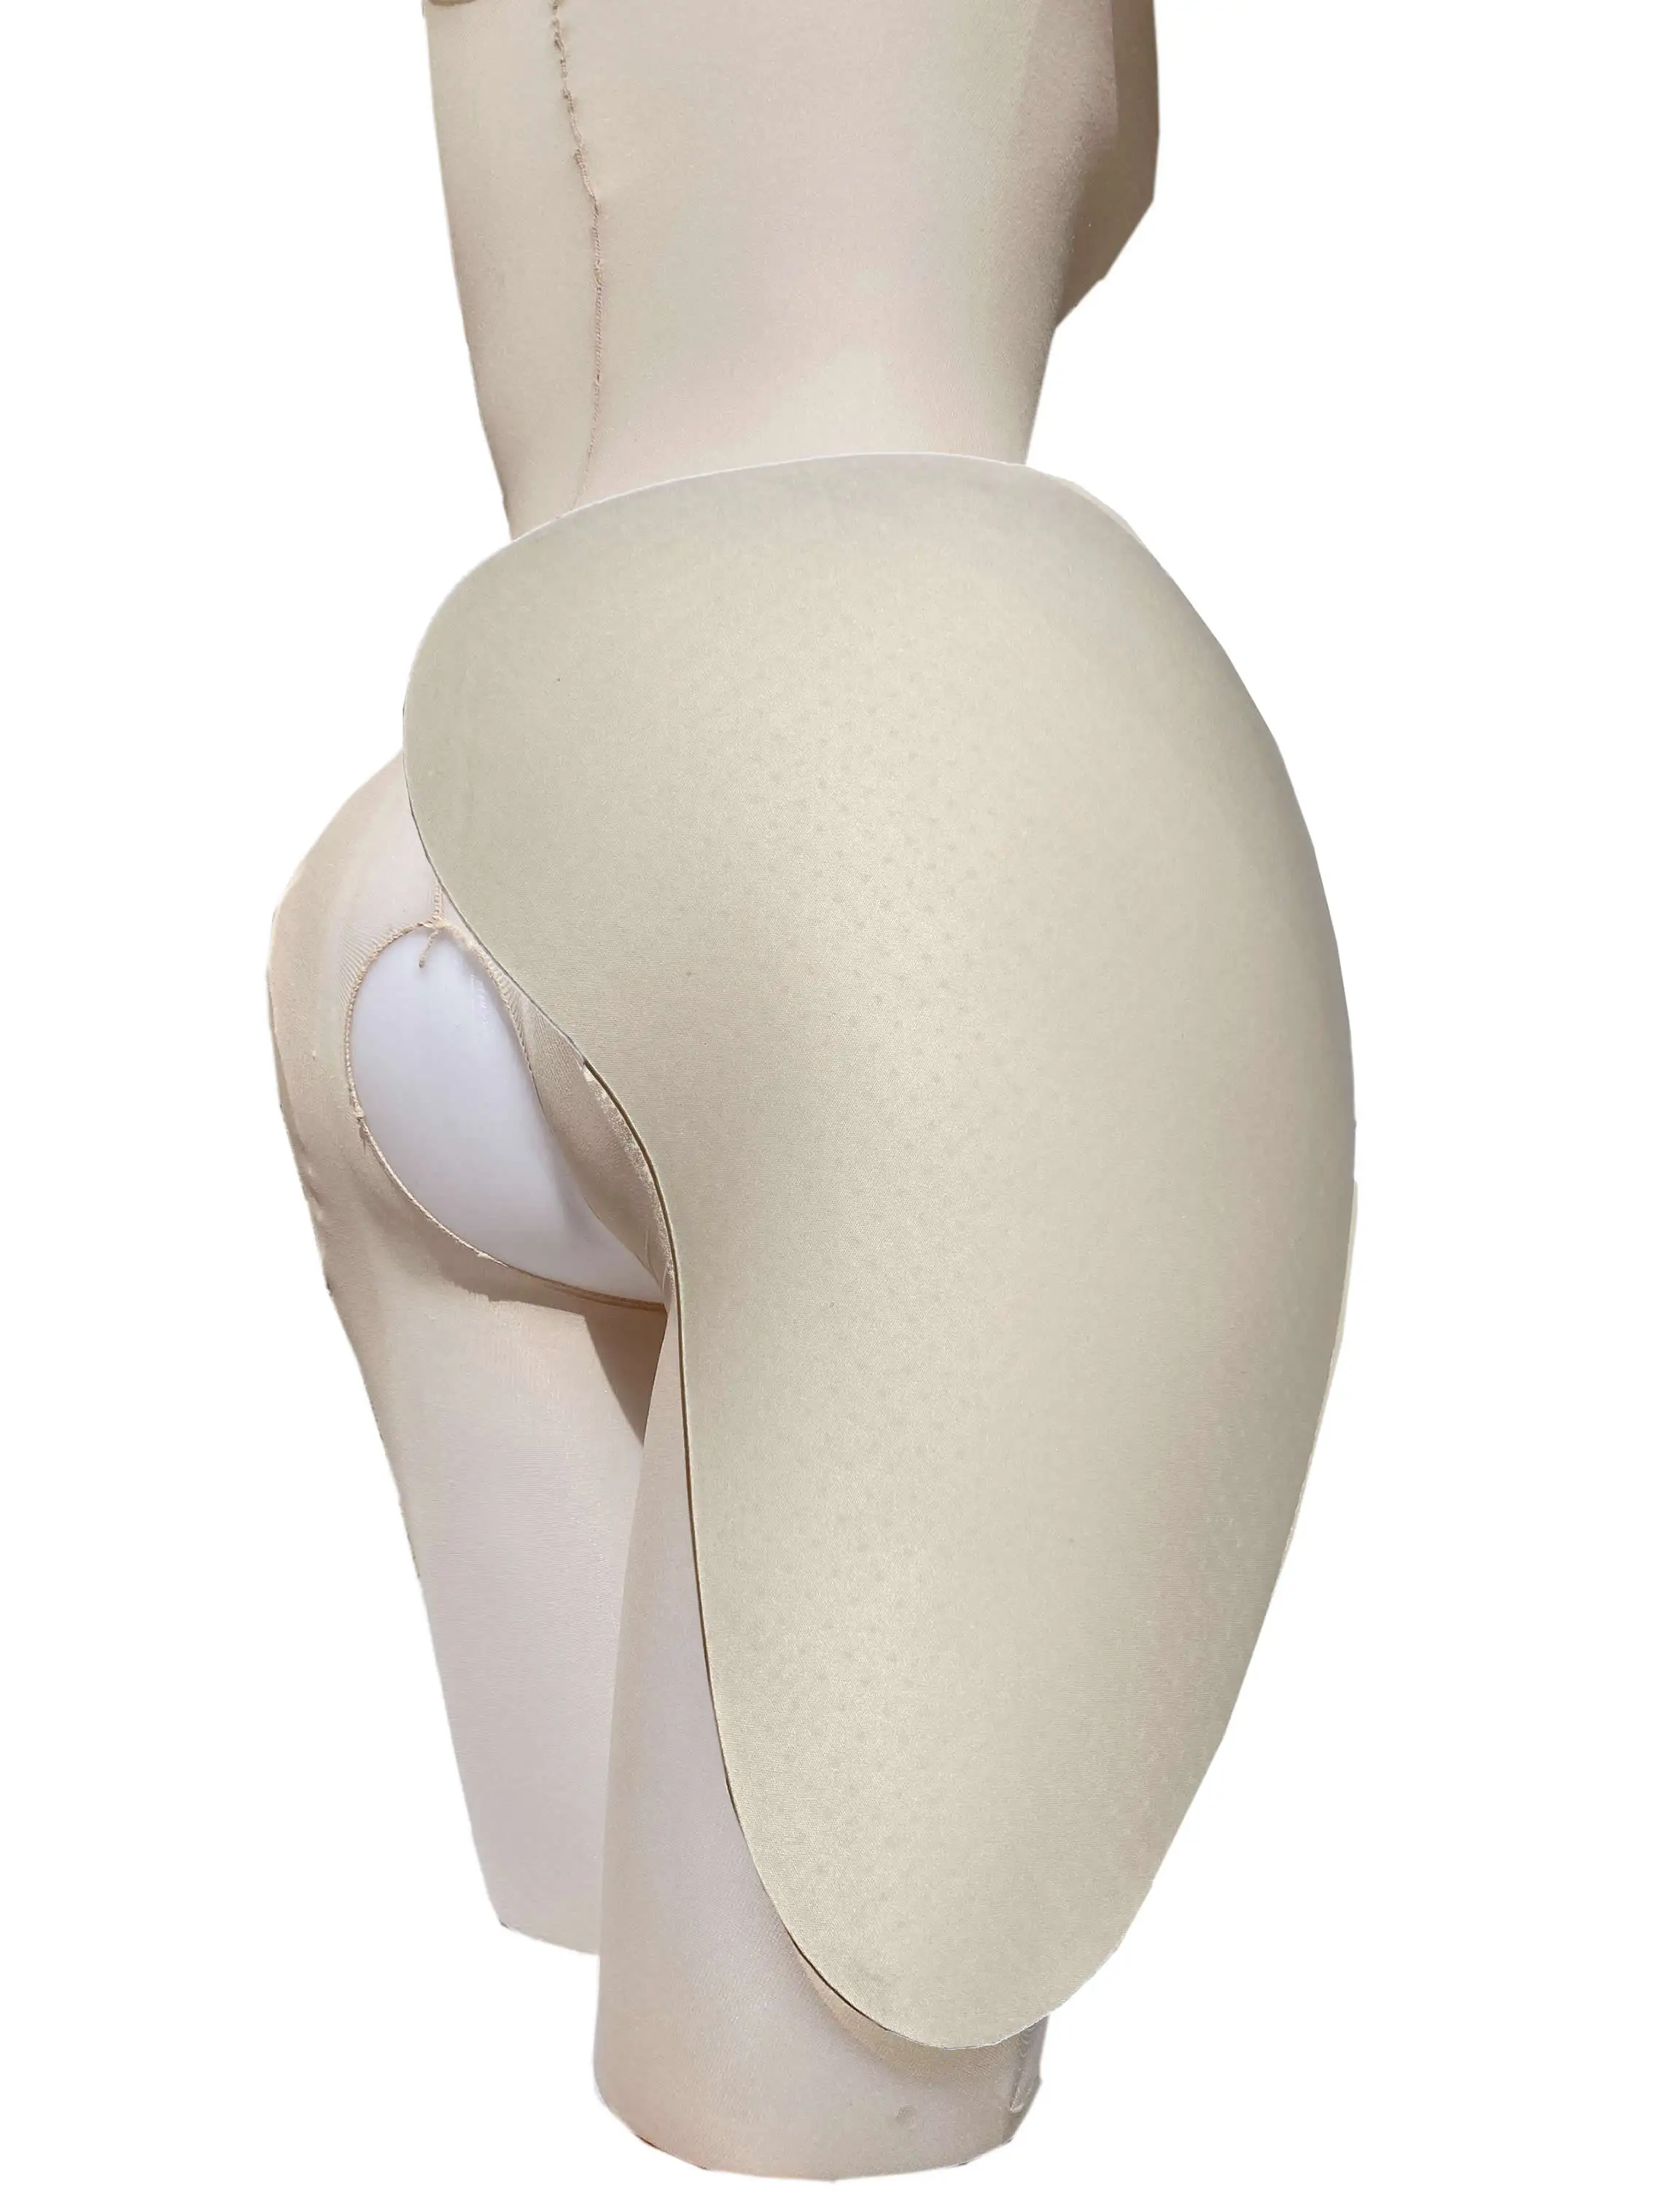 

A Pair of Butt Lifter Women Padded Hips and Butt Fake Booty Lifter Thigh Sponge Pads To Full buttocks Enlarge Hip